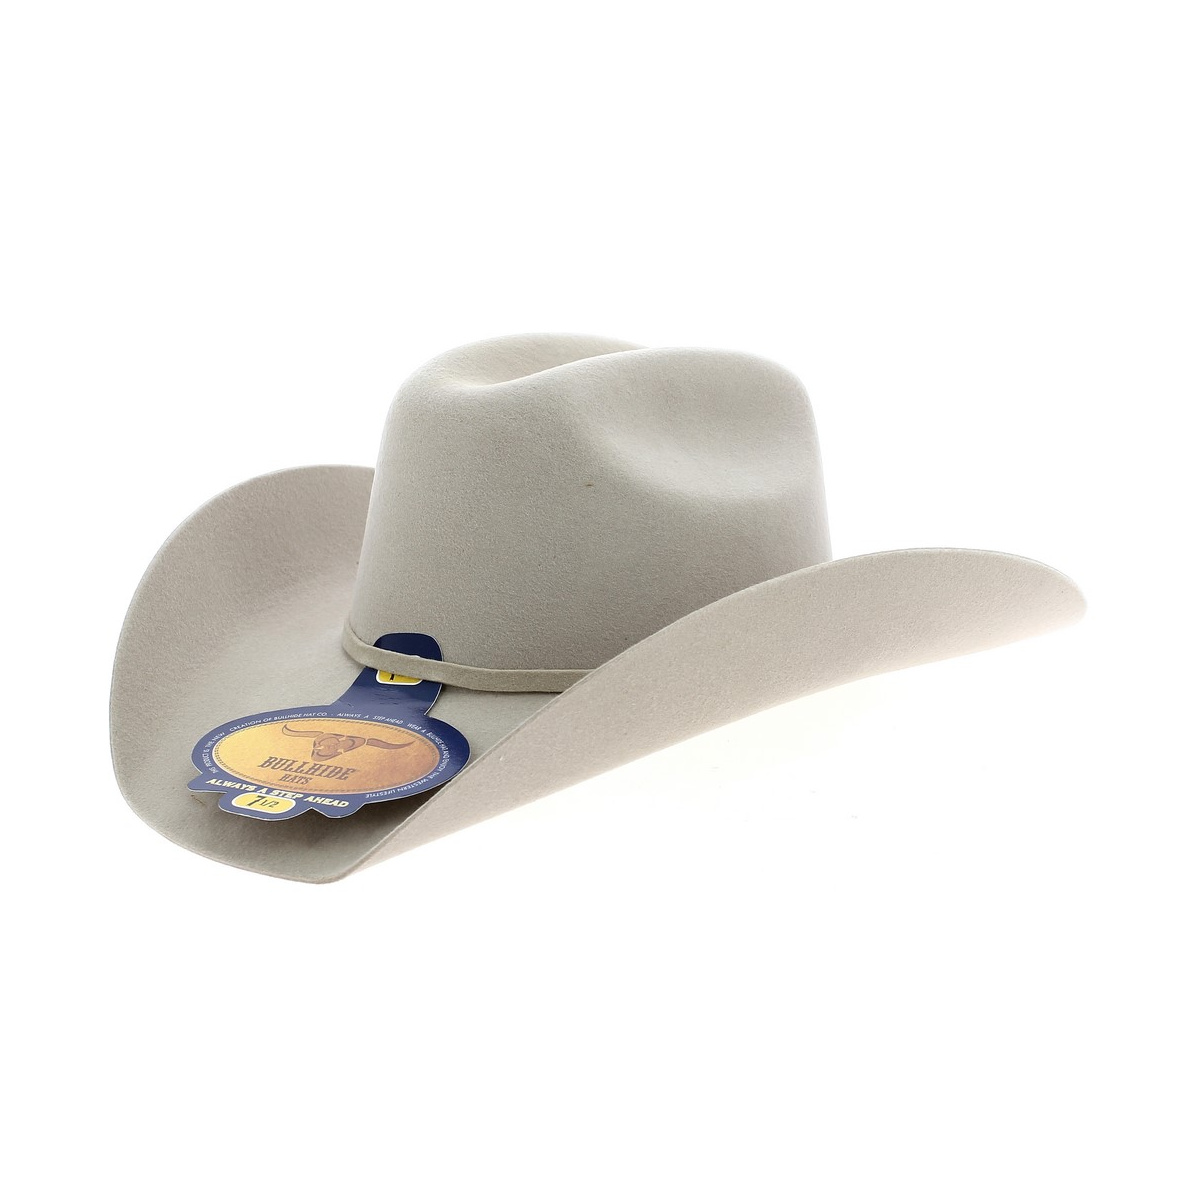 Chapeau western - Country Silvertone Reference : 126